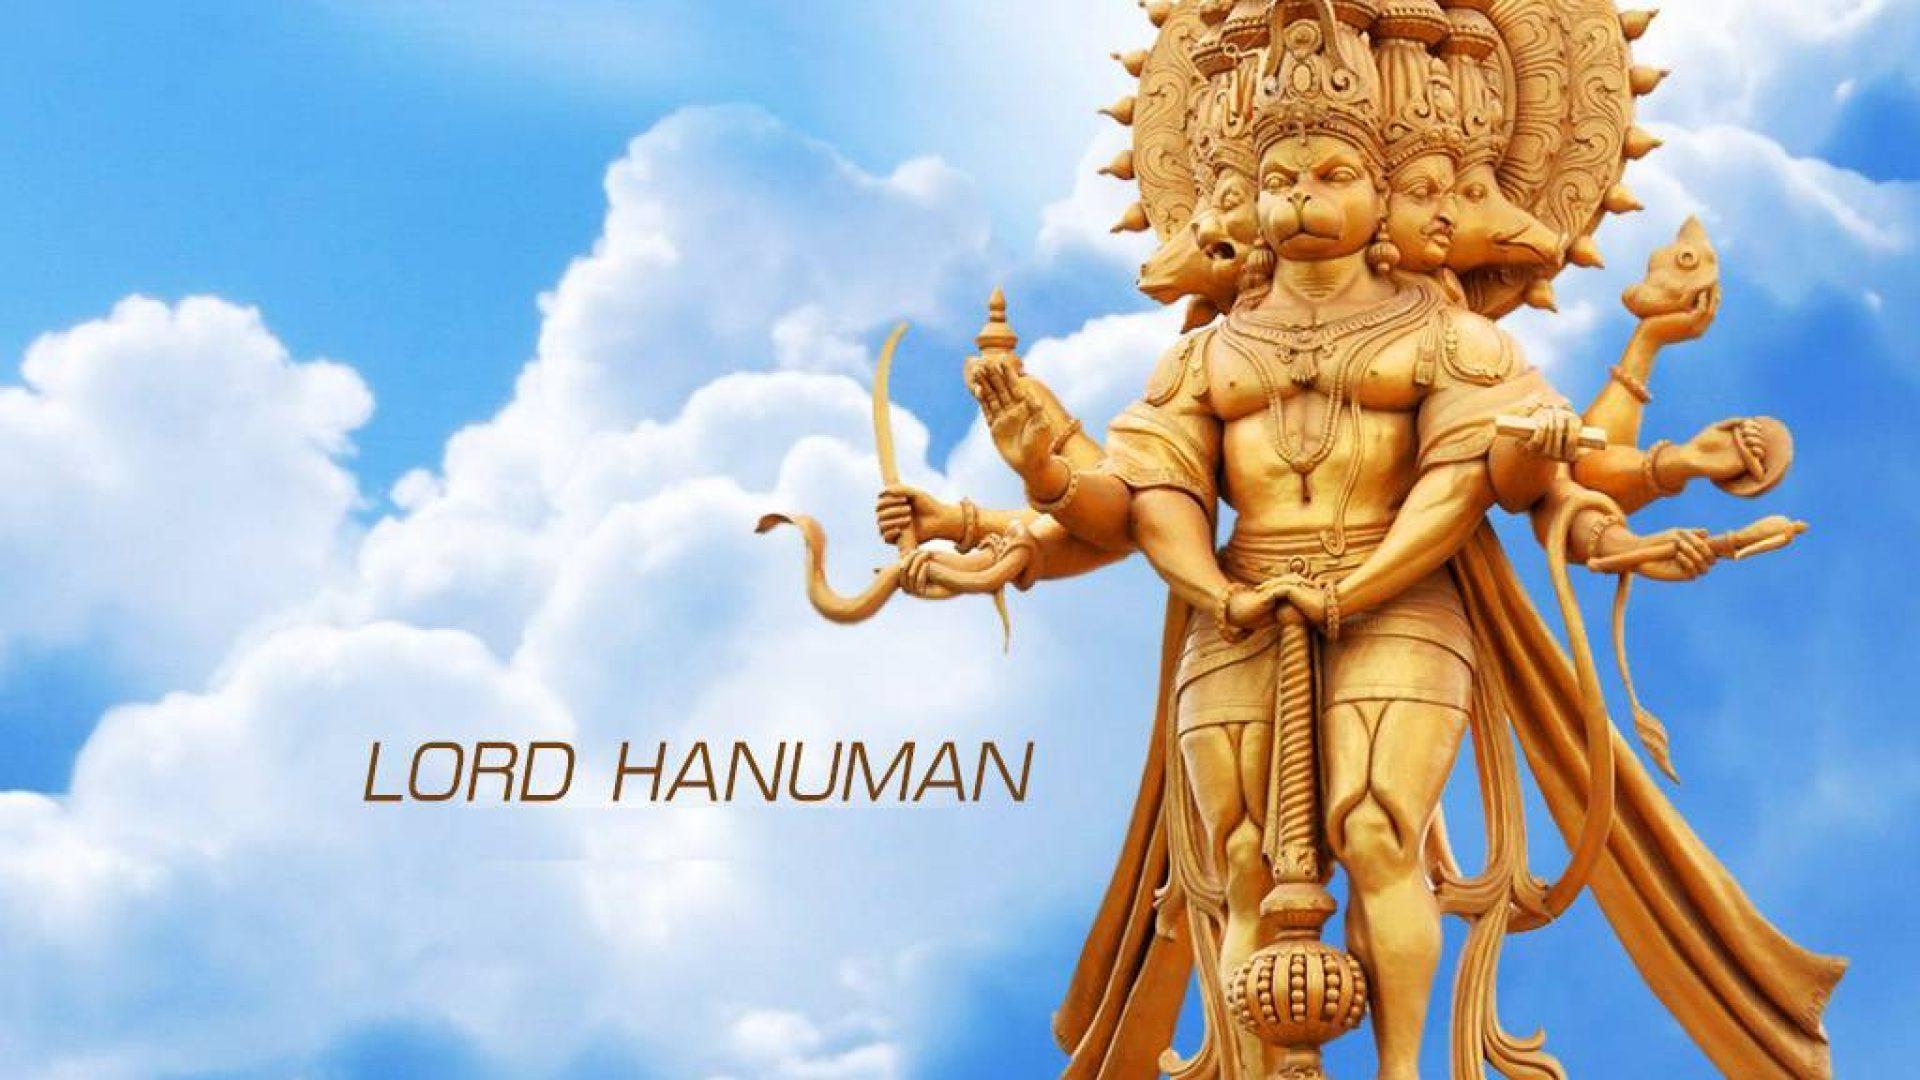 Hanuman Image Most Unique and Beautiful Collection!